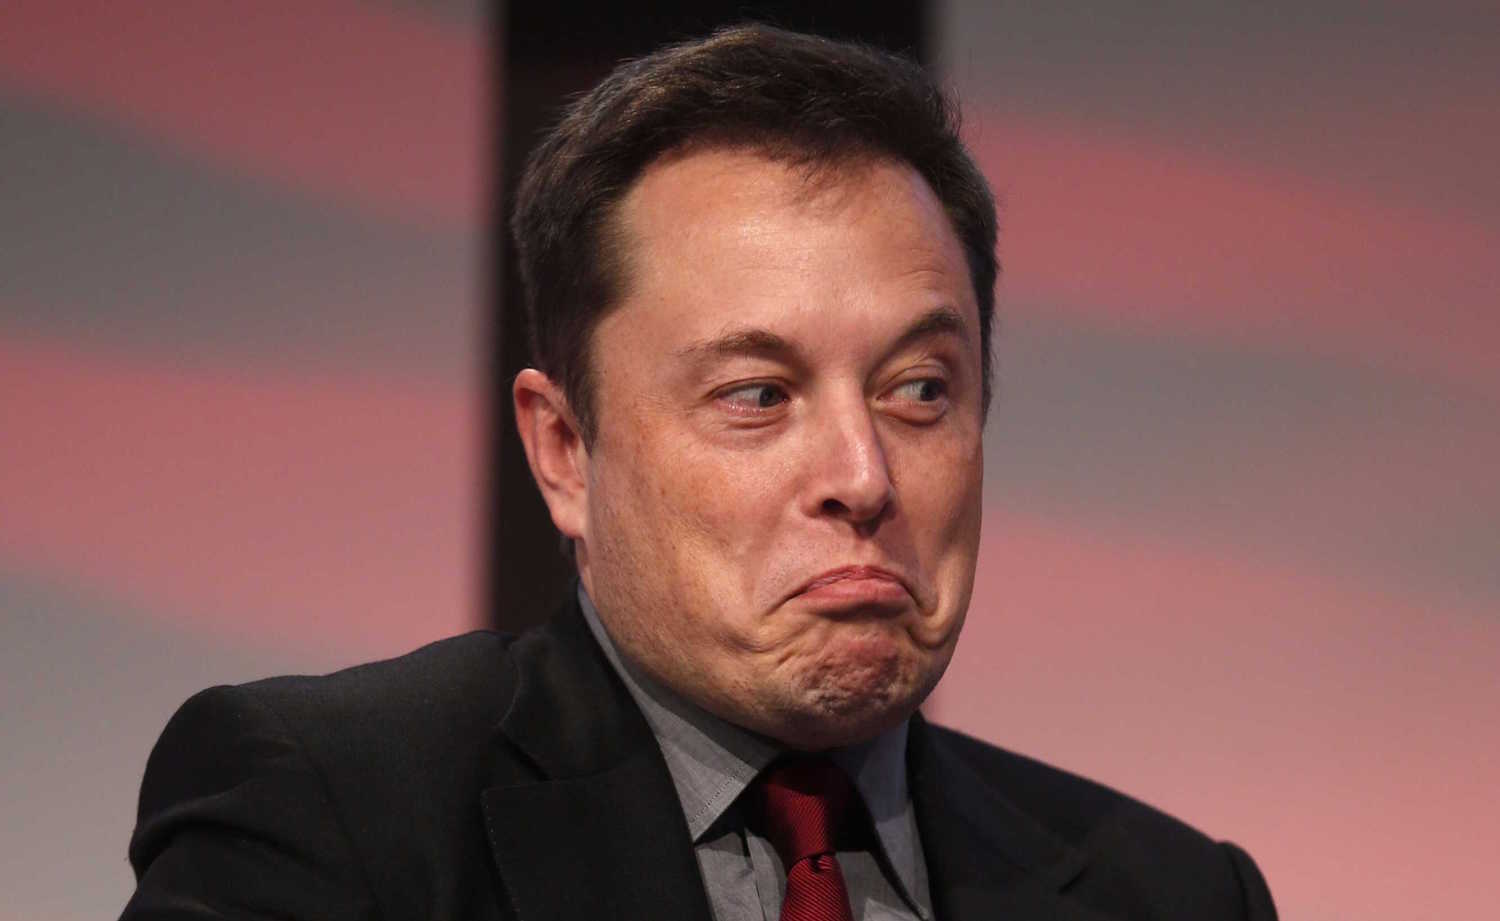 Elon Musk ends Twitter deal: How the company’s employees reacted to Tesla CEO’s pull-out